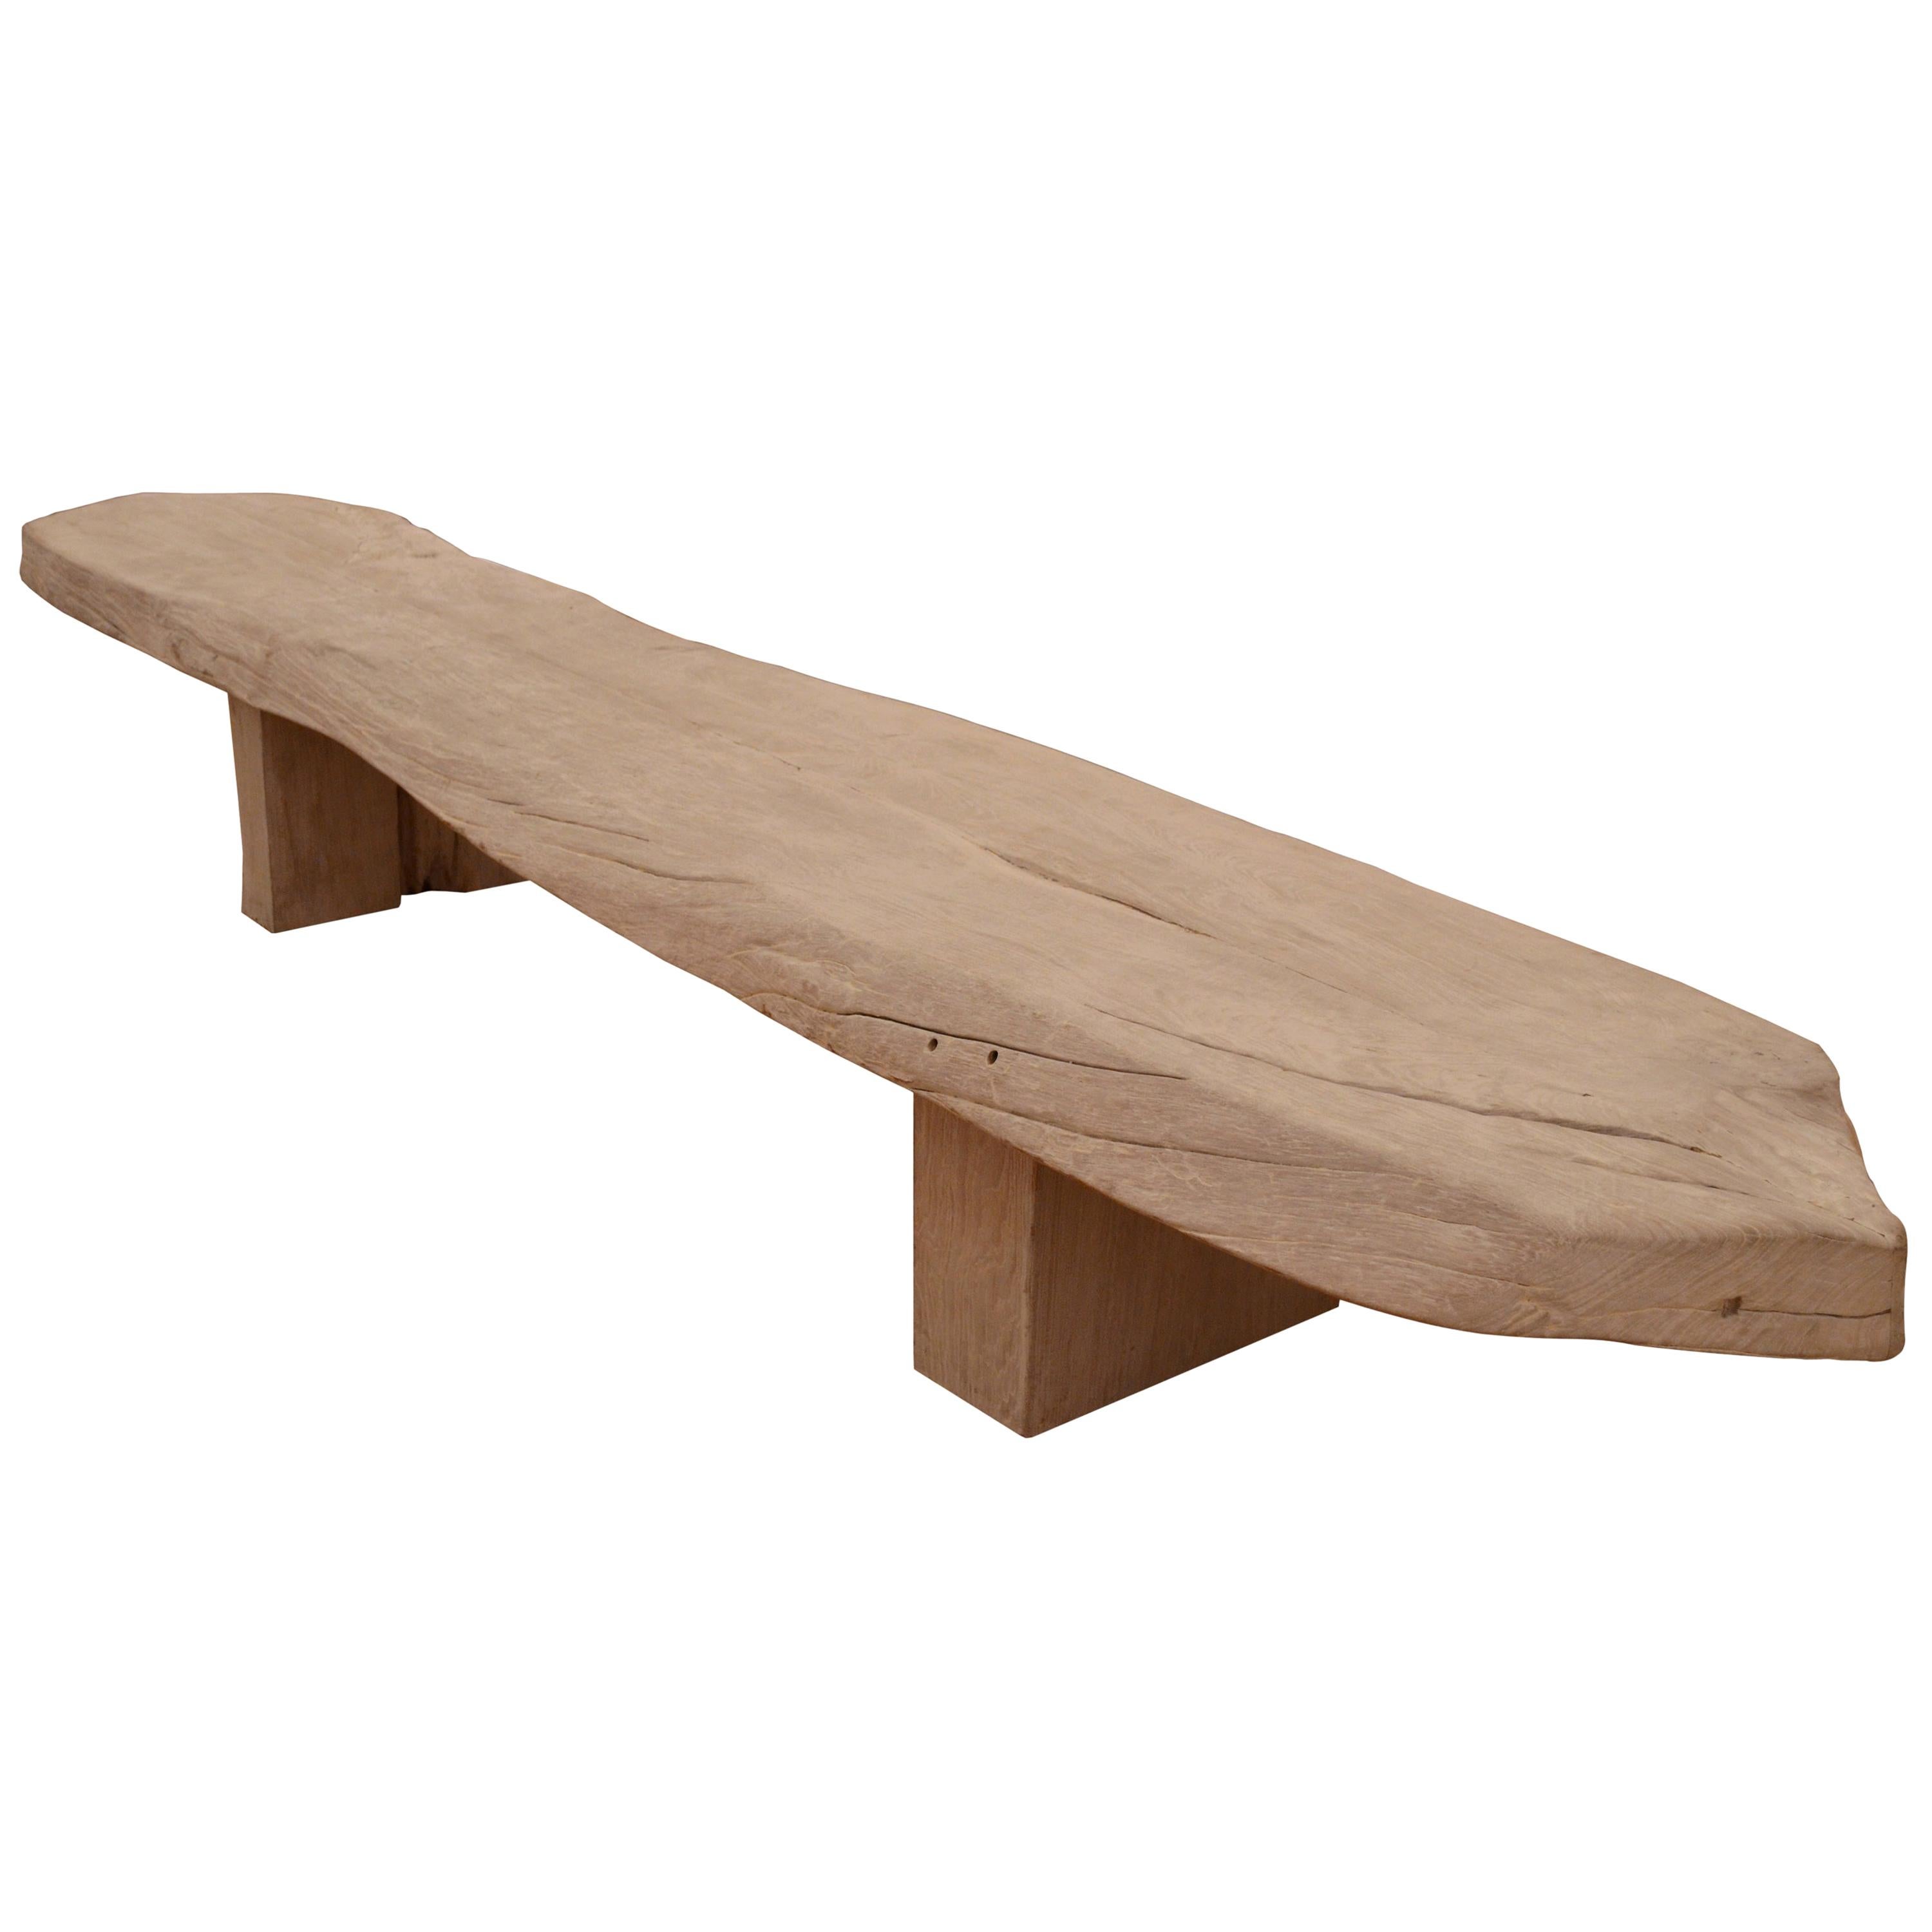 Andrianna Shamaris St. Barts Teak Wood Bench or Coffee Table For Sale